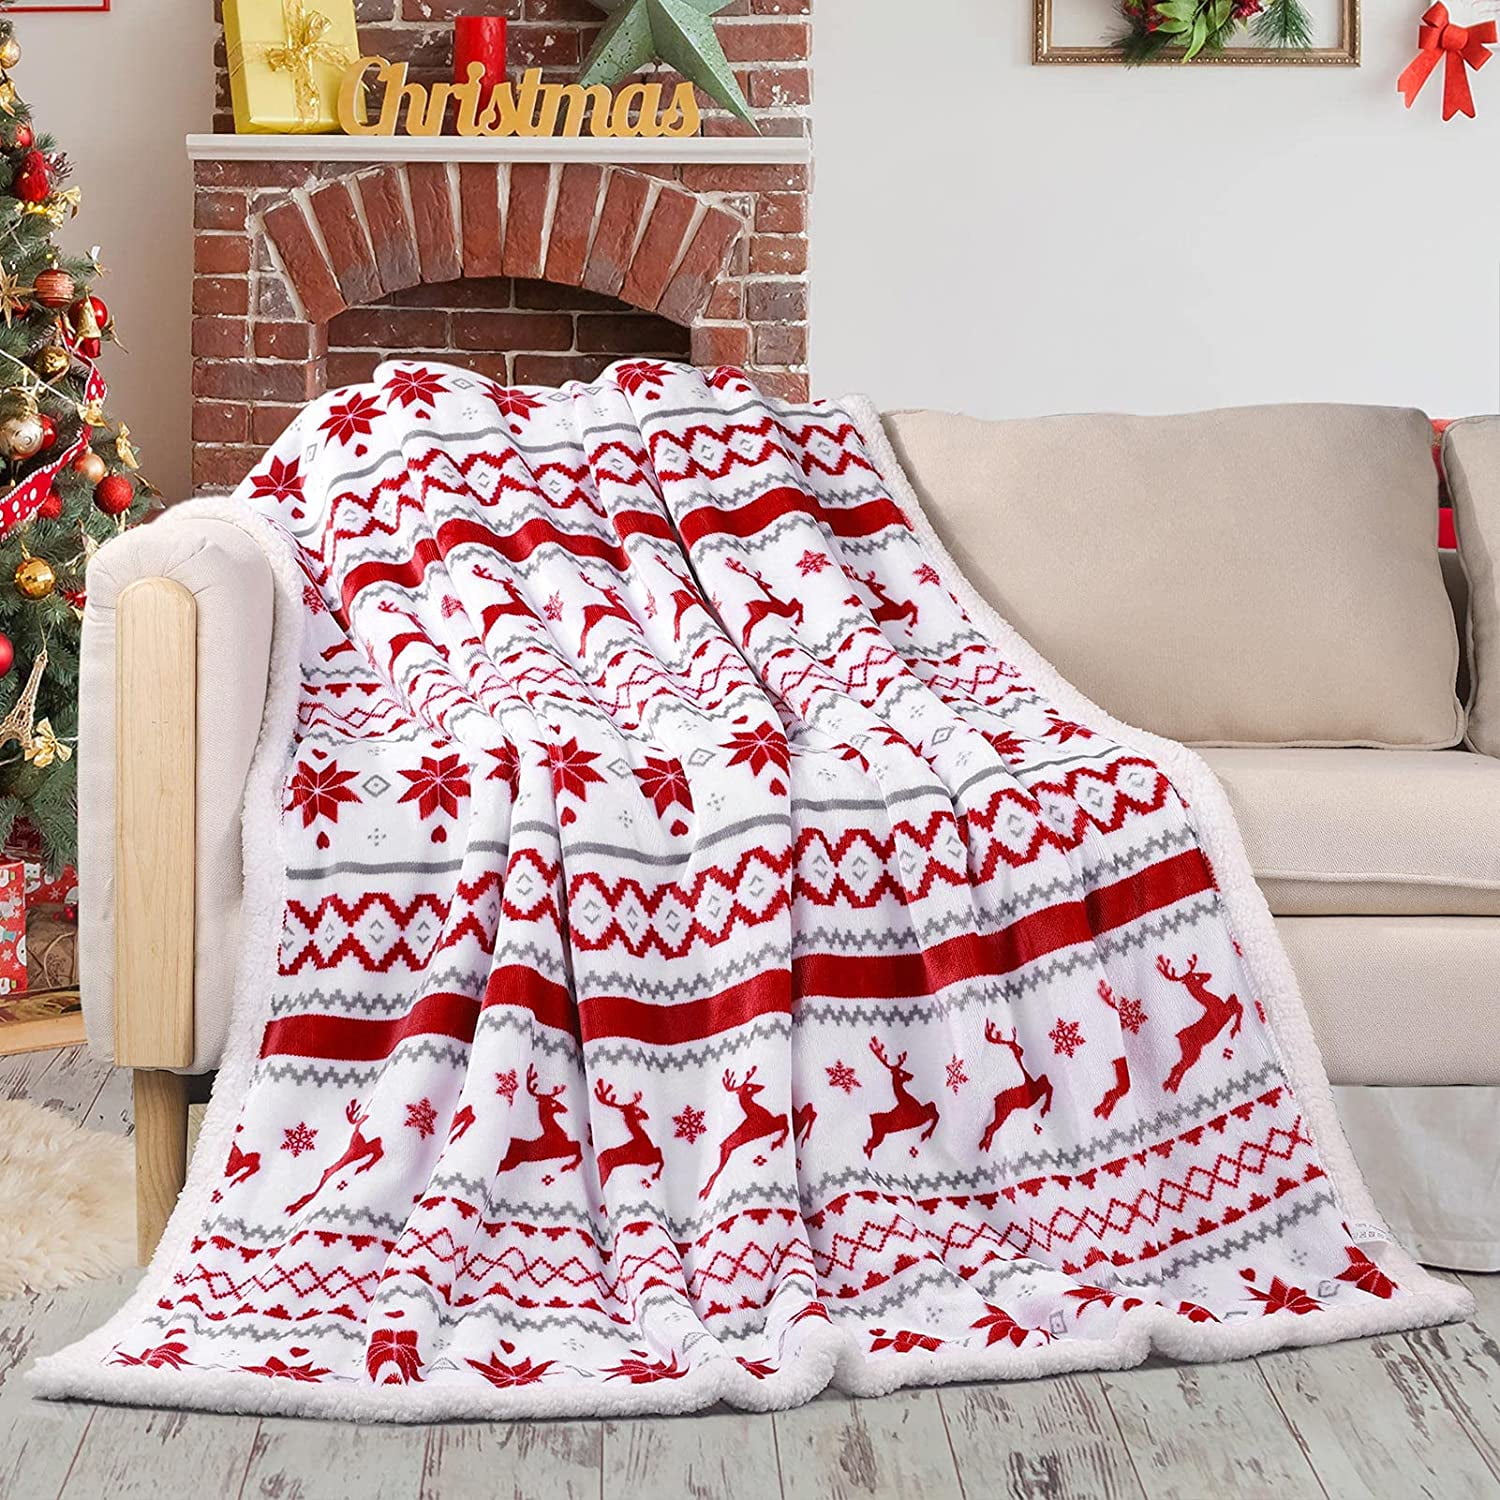 Microfiber Nap Blanket for Couch Flannel Fleece Blanket Bed Red Checkered Truck with Christmas Tree Throw Blanket 80 x 50 Sofa Cozy Fuzzy Warm Cute Lightweight Blanket for Women Girl Baby